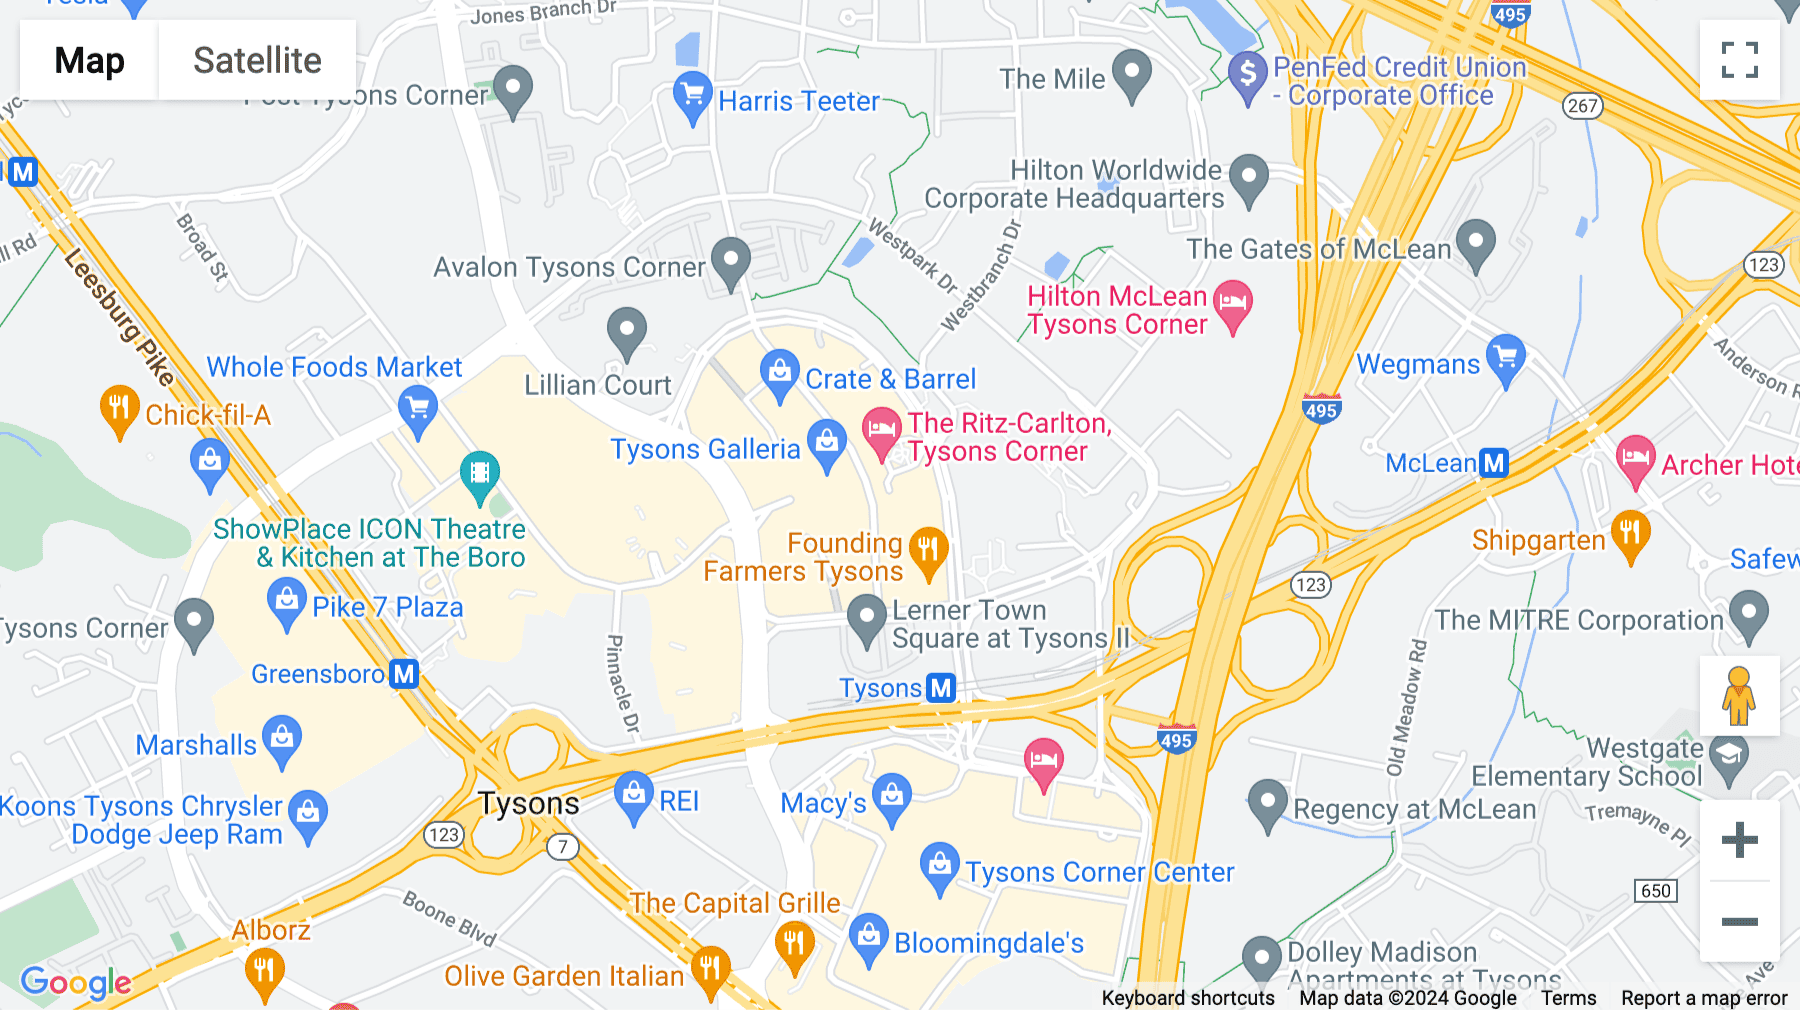 Click for interative map of 1750 Tysons Boulevard, Suite 1500, McLean